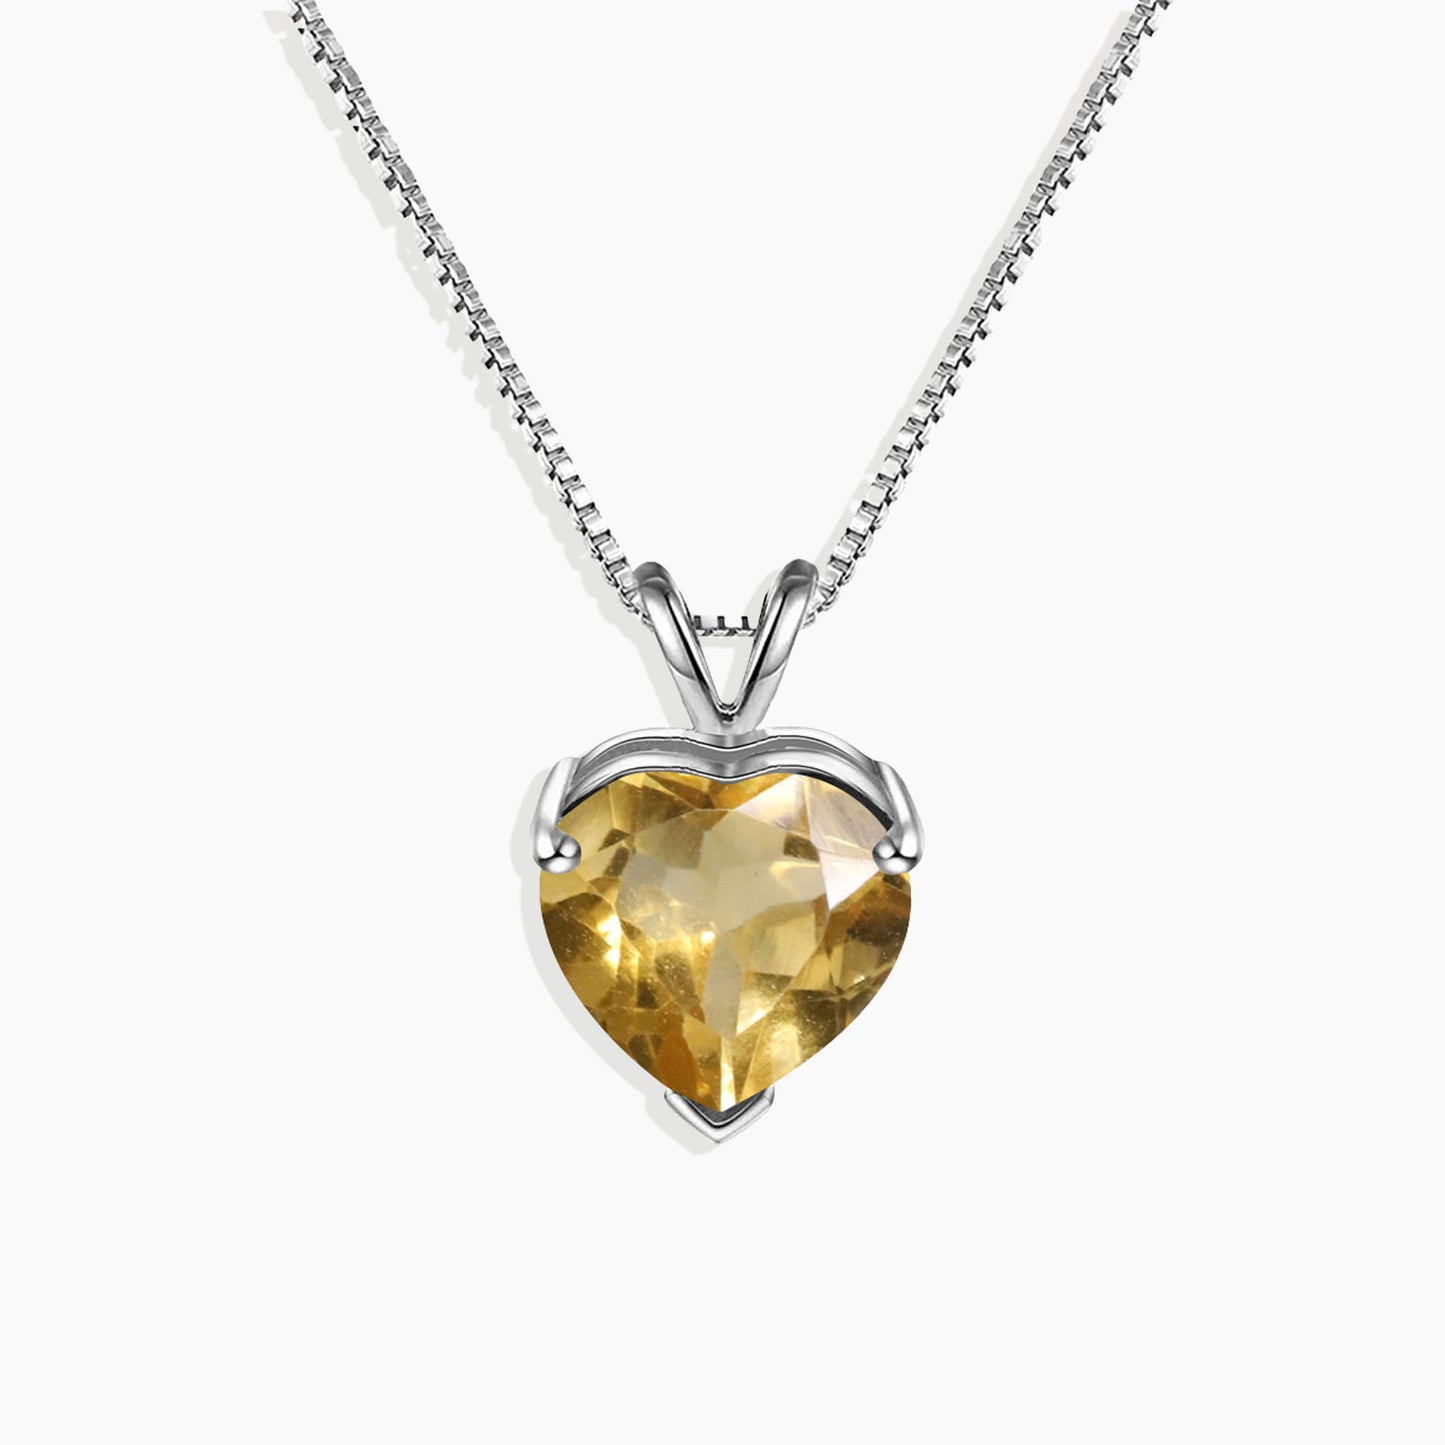 Heart Shaped Gemstone Necklace in Sterling Silver -  Citrine